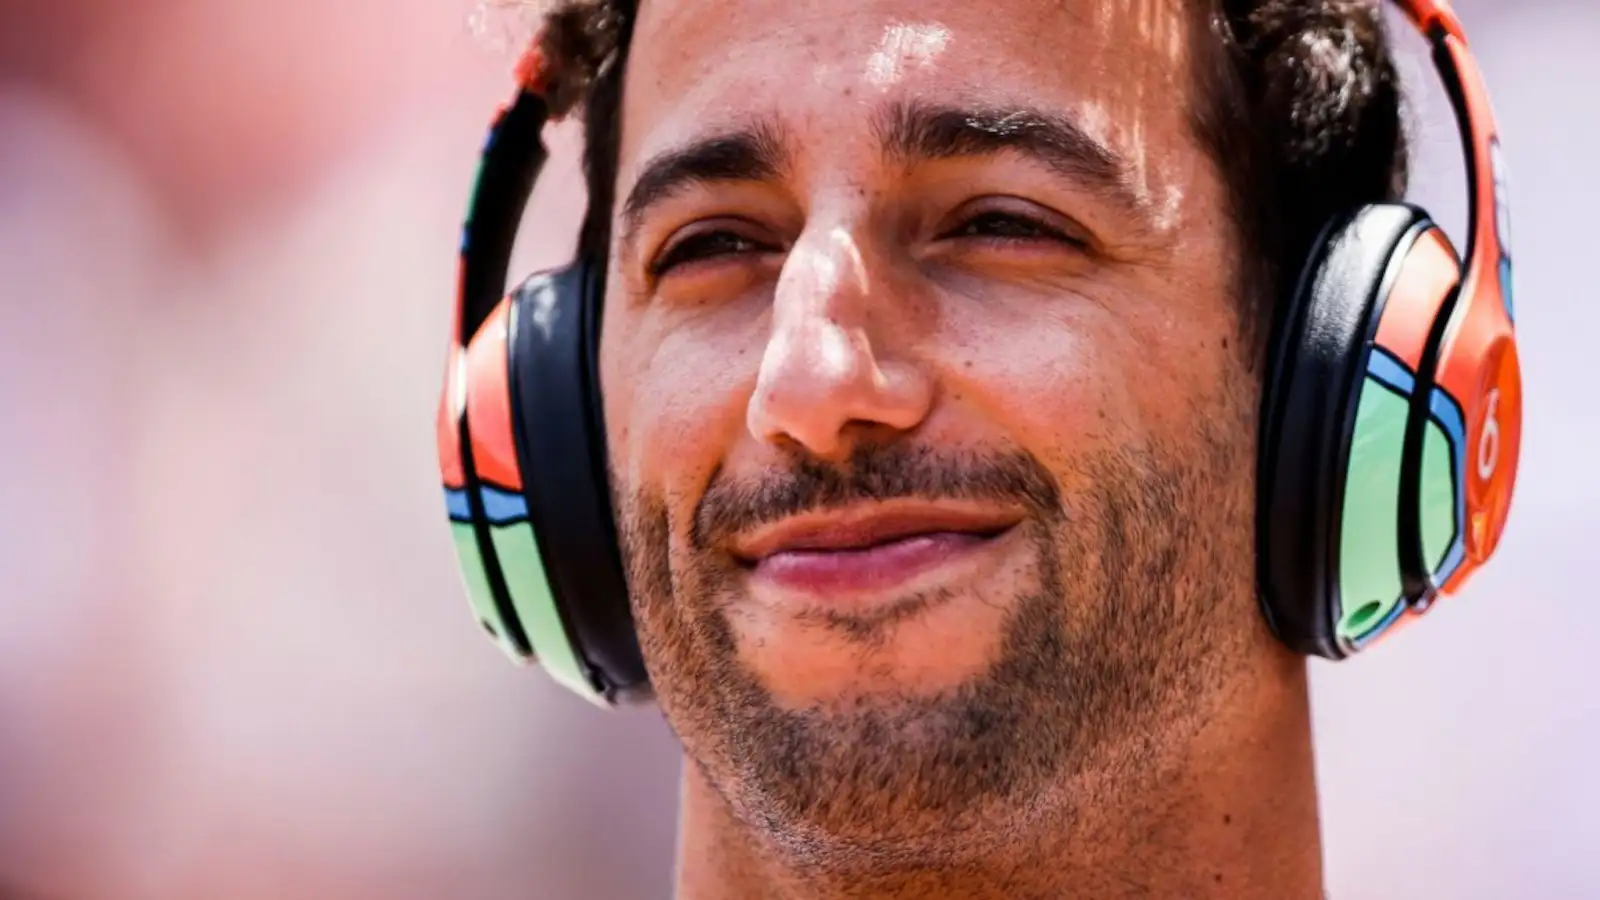 Daniel Ricciardo with a smile as he listens to music with headphones on. Monaco May 2022